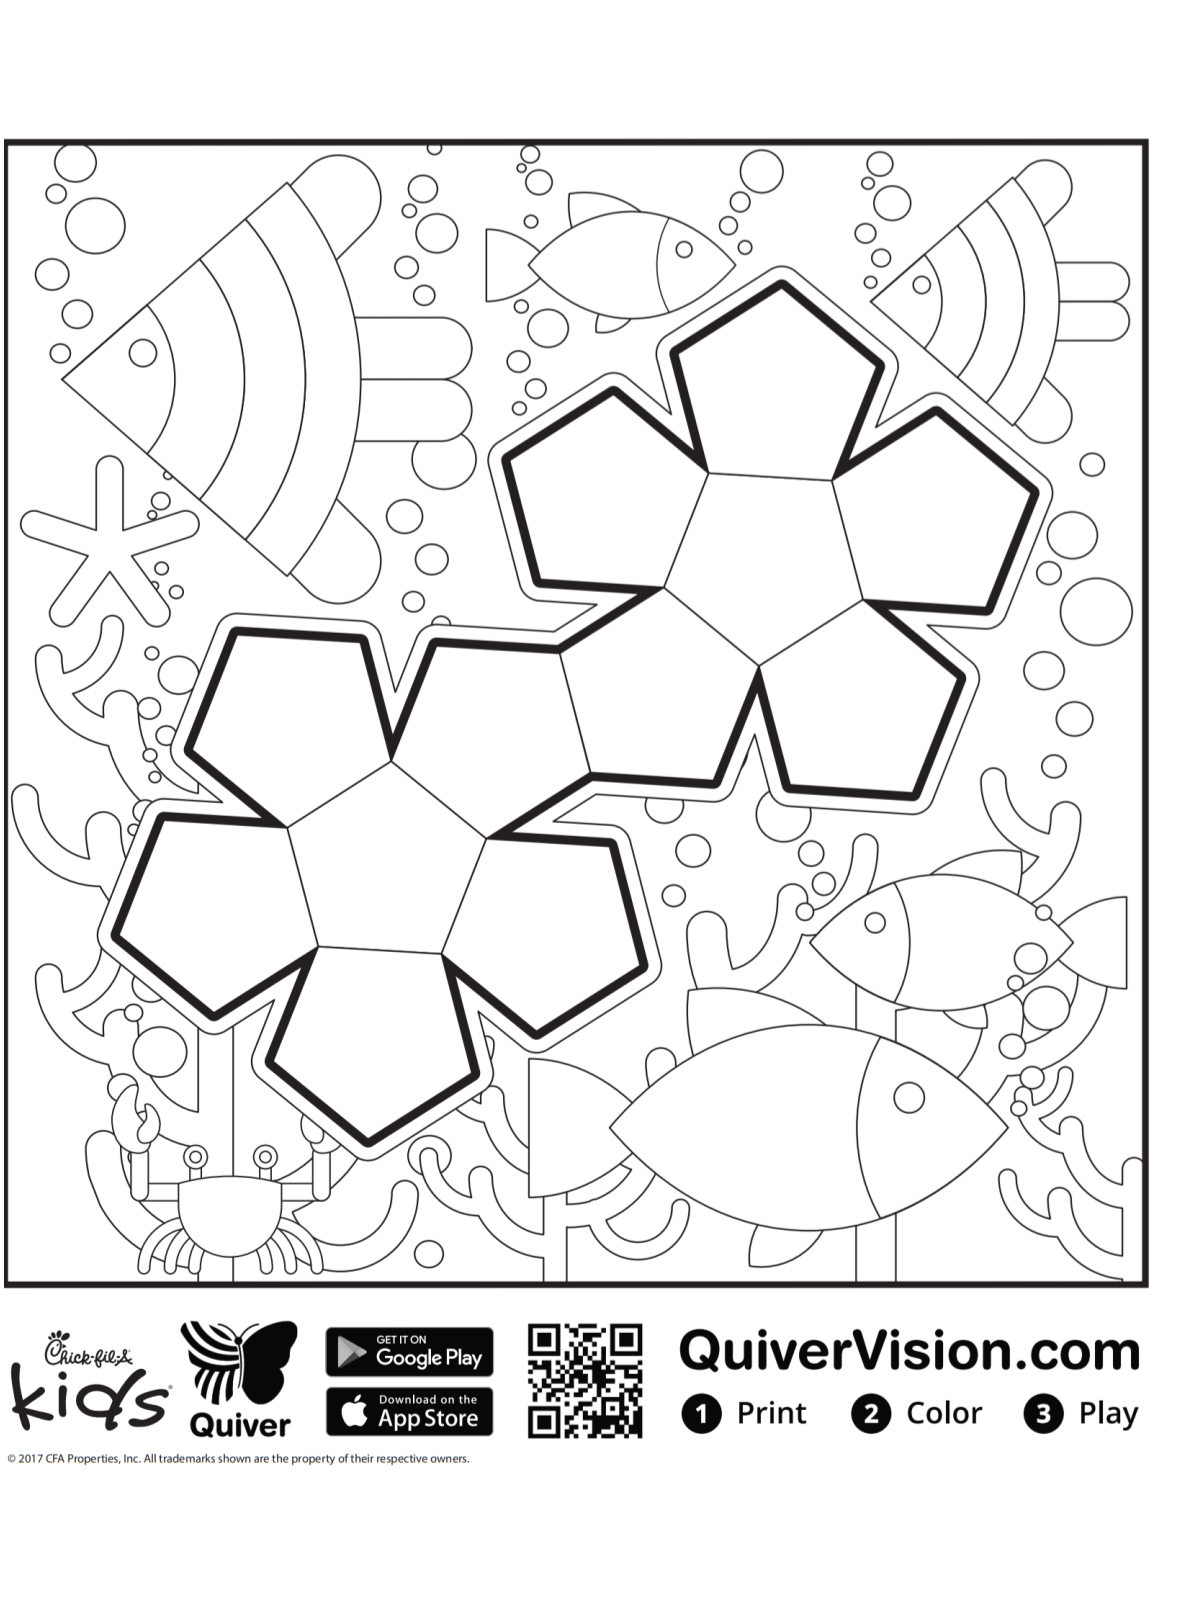 Kids n fun.com   Coloring page Quiver shapes 4